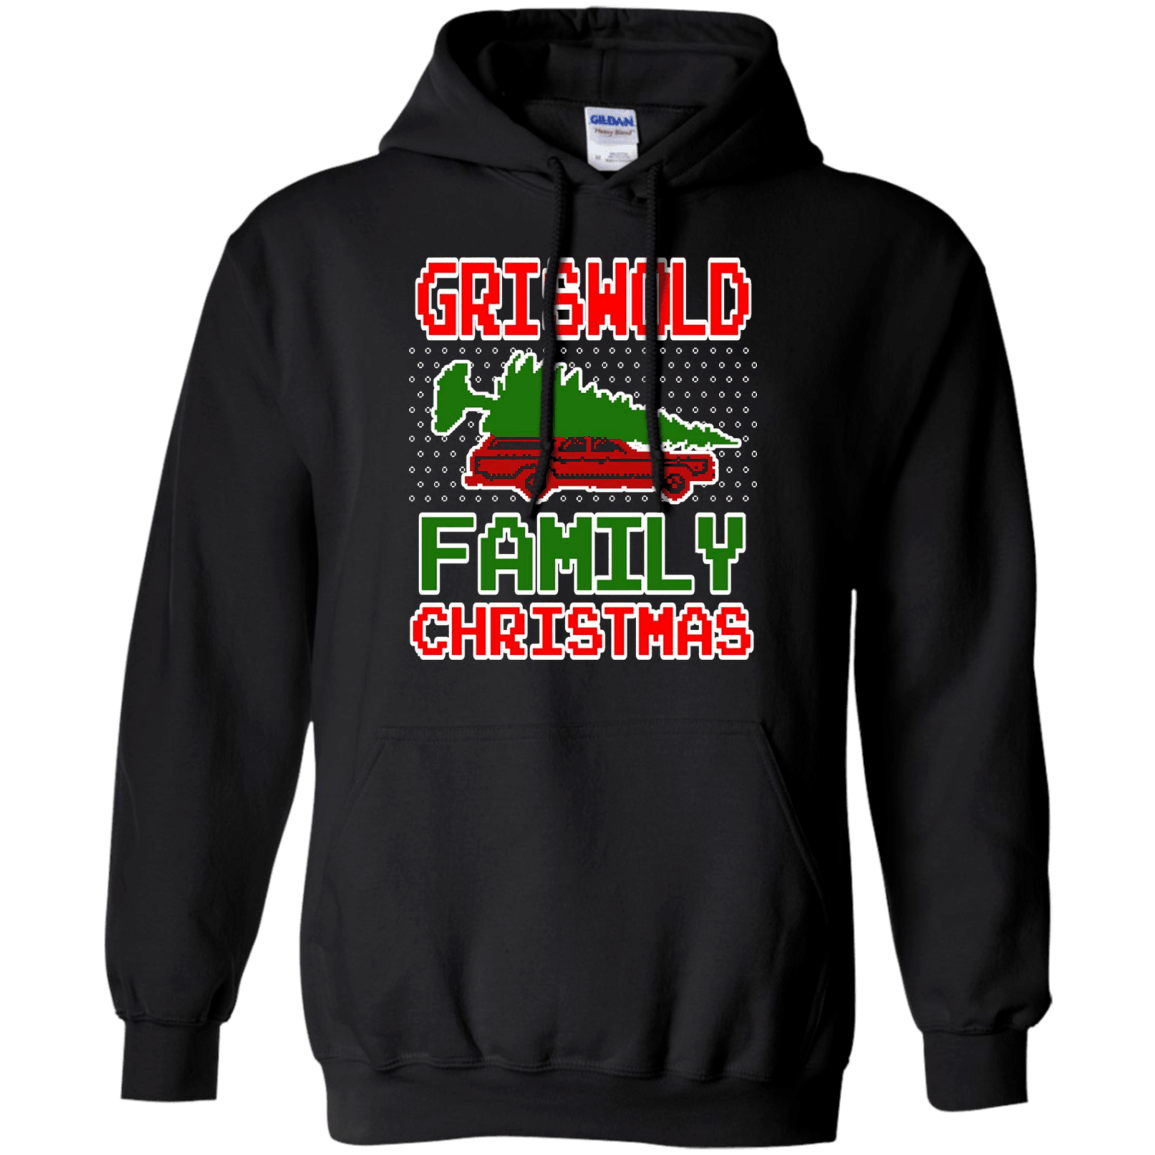 funny-griswold-family-t-shirt-ugly-christmas-sweater-tee-hoddies